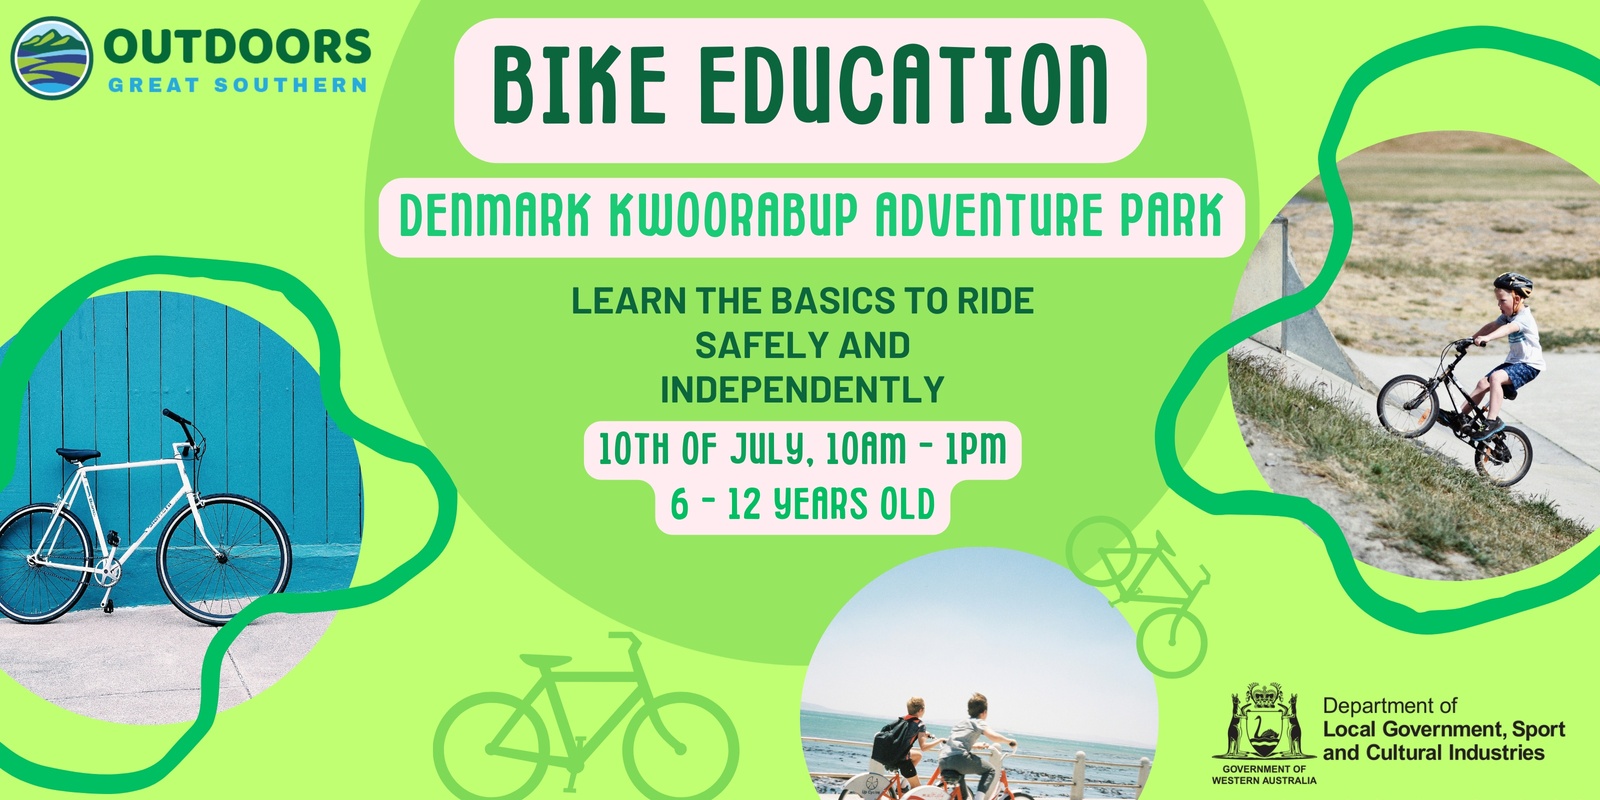 Banner image for Bike Education - 10th July Kwoorabup Adventure Park, Denmark 6 - 12 years